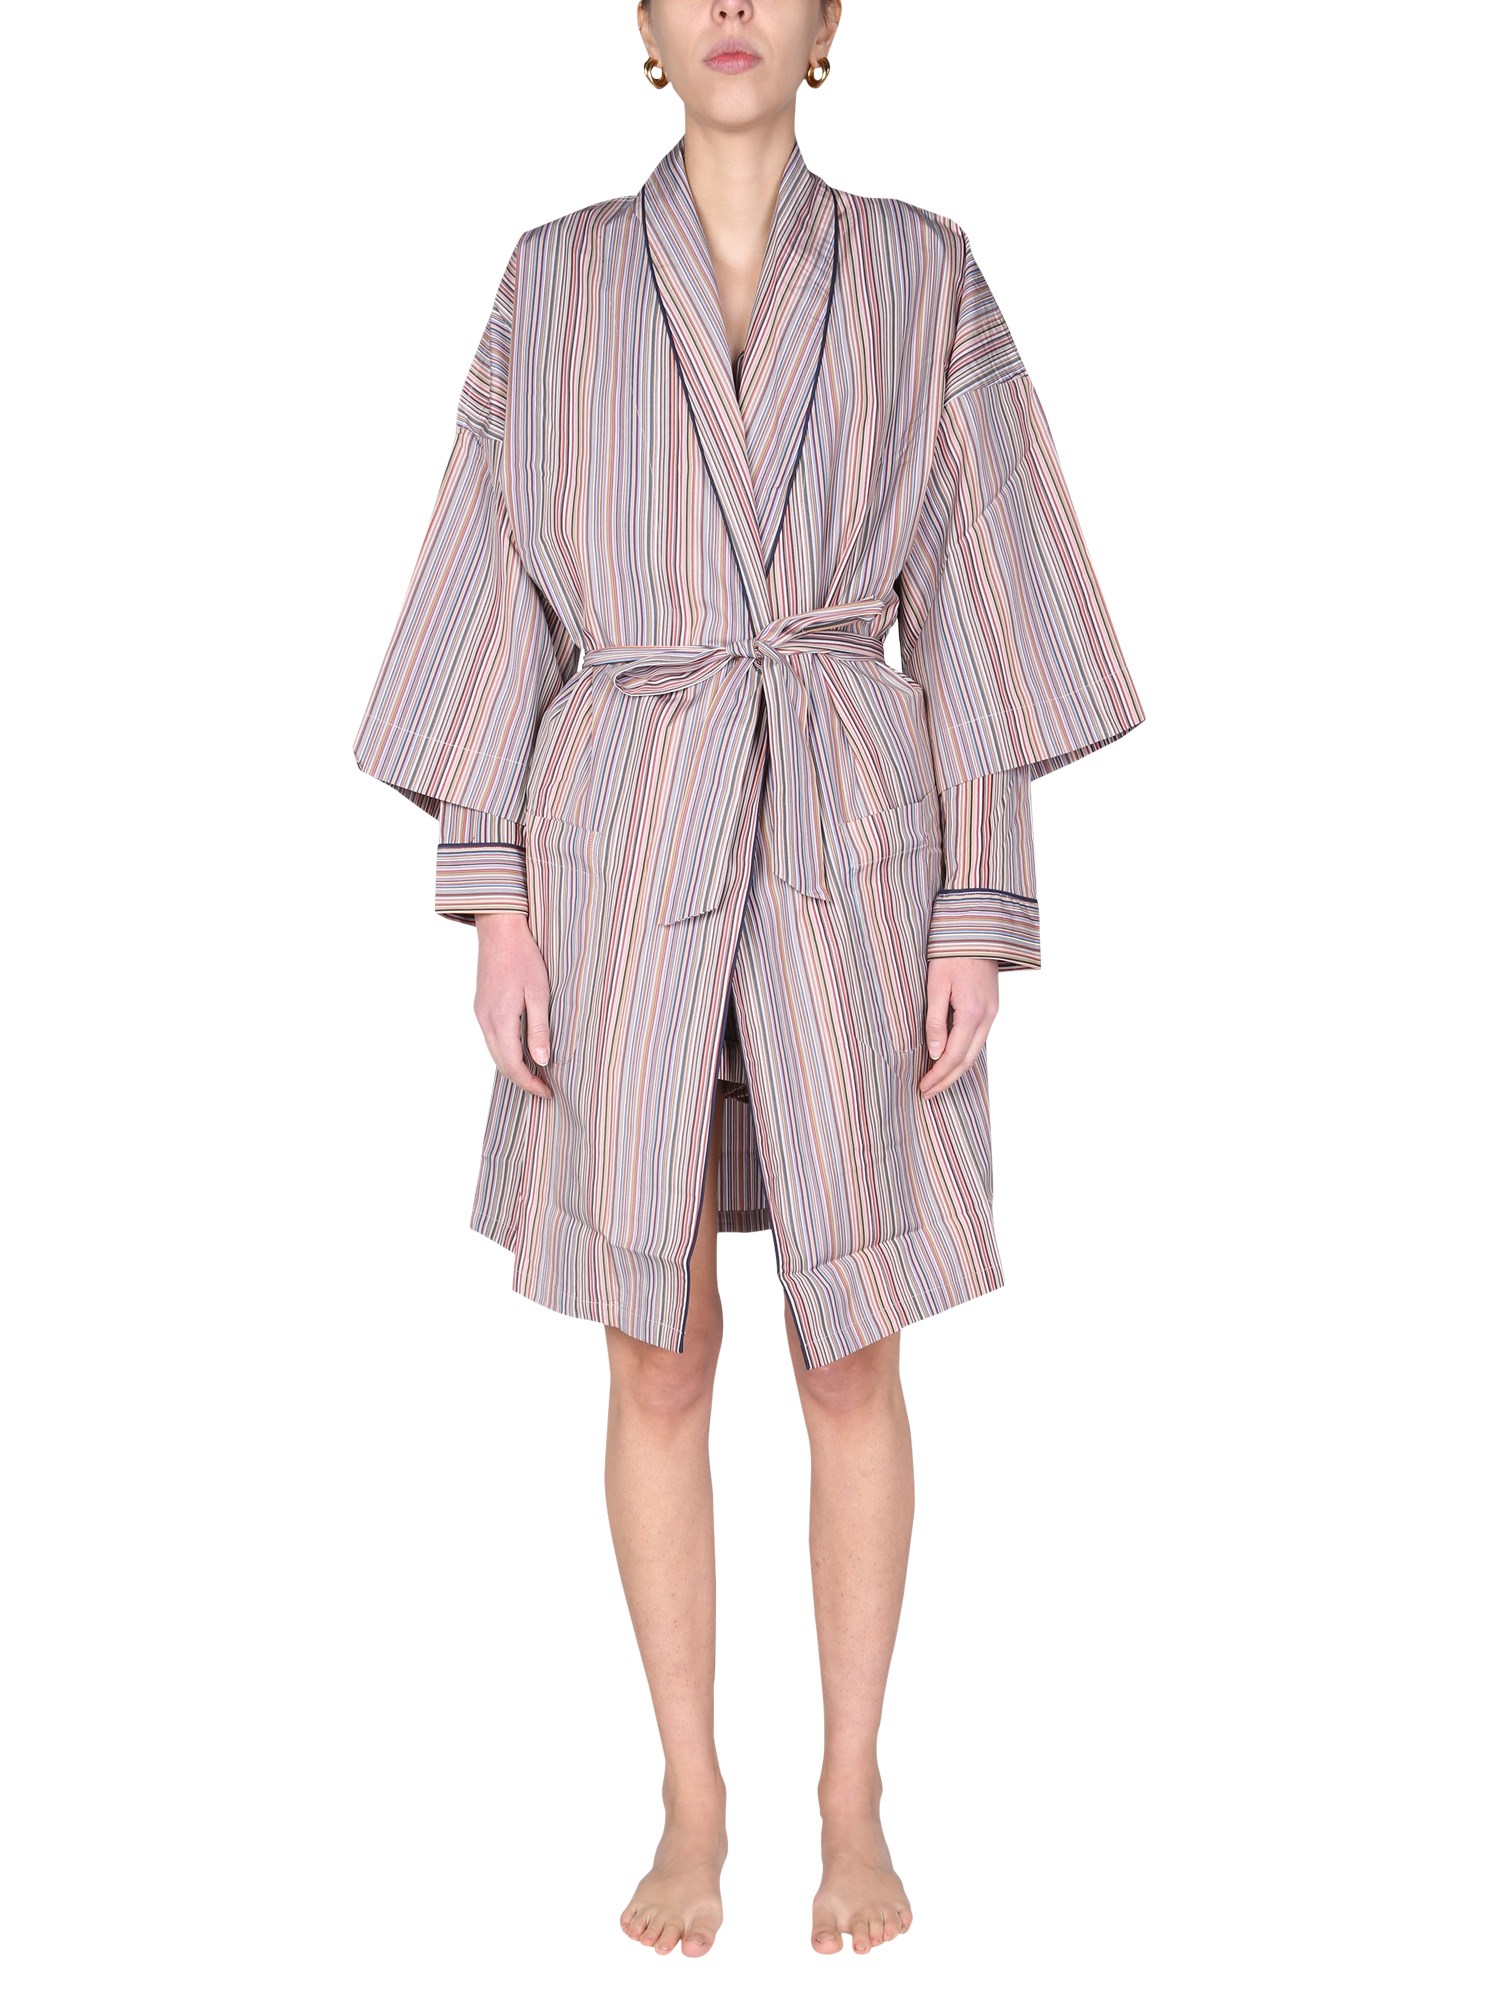 paul smith dressing gown with striped pattern